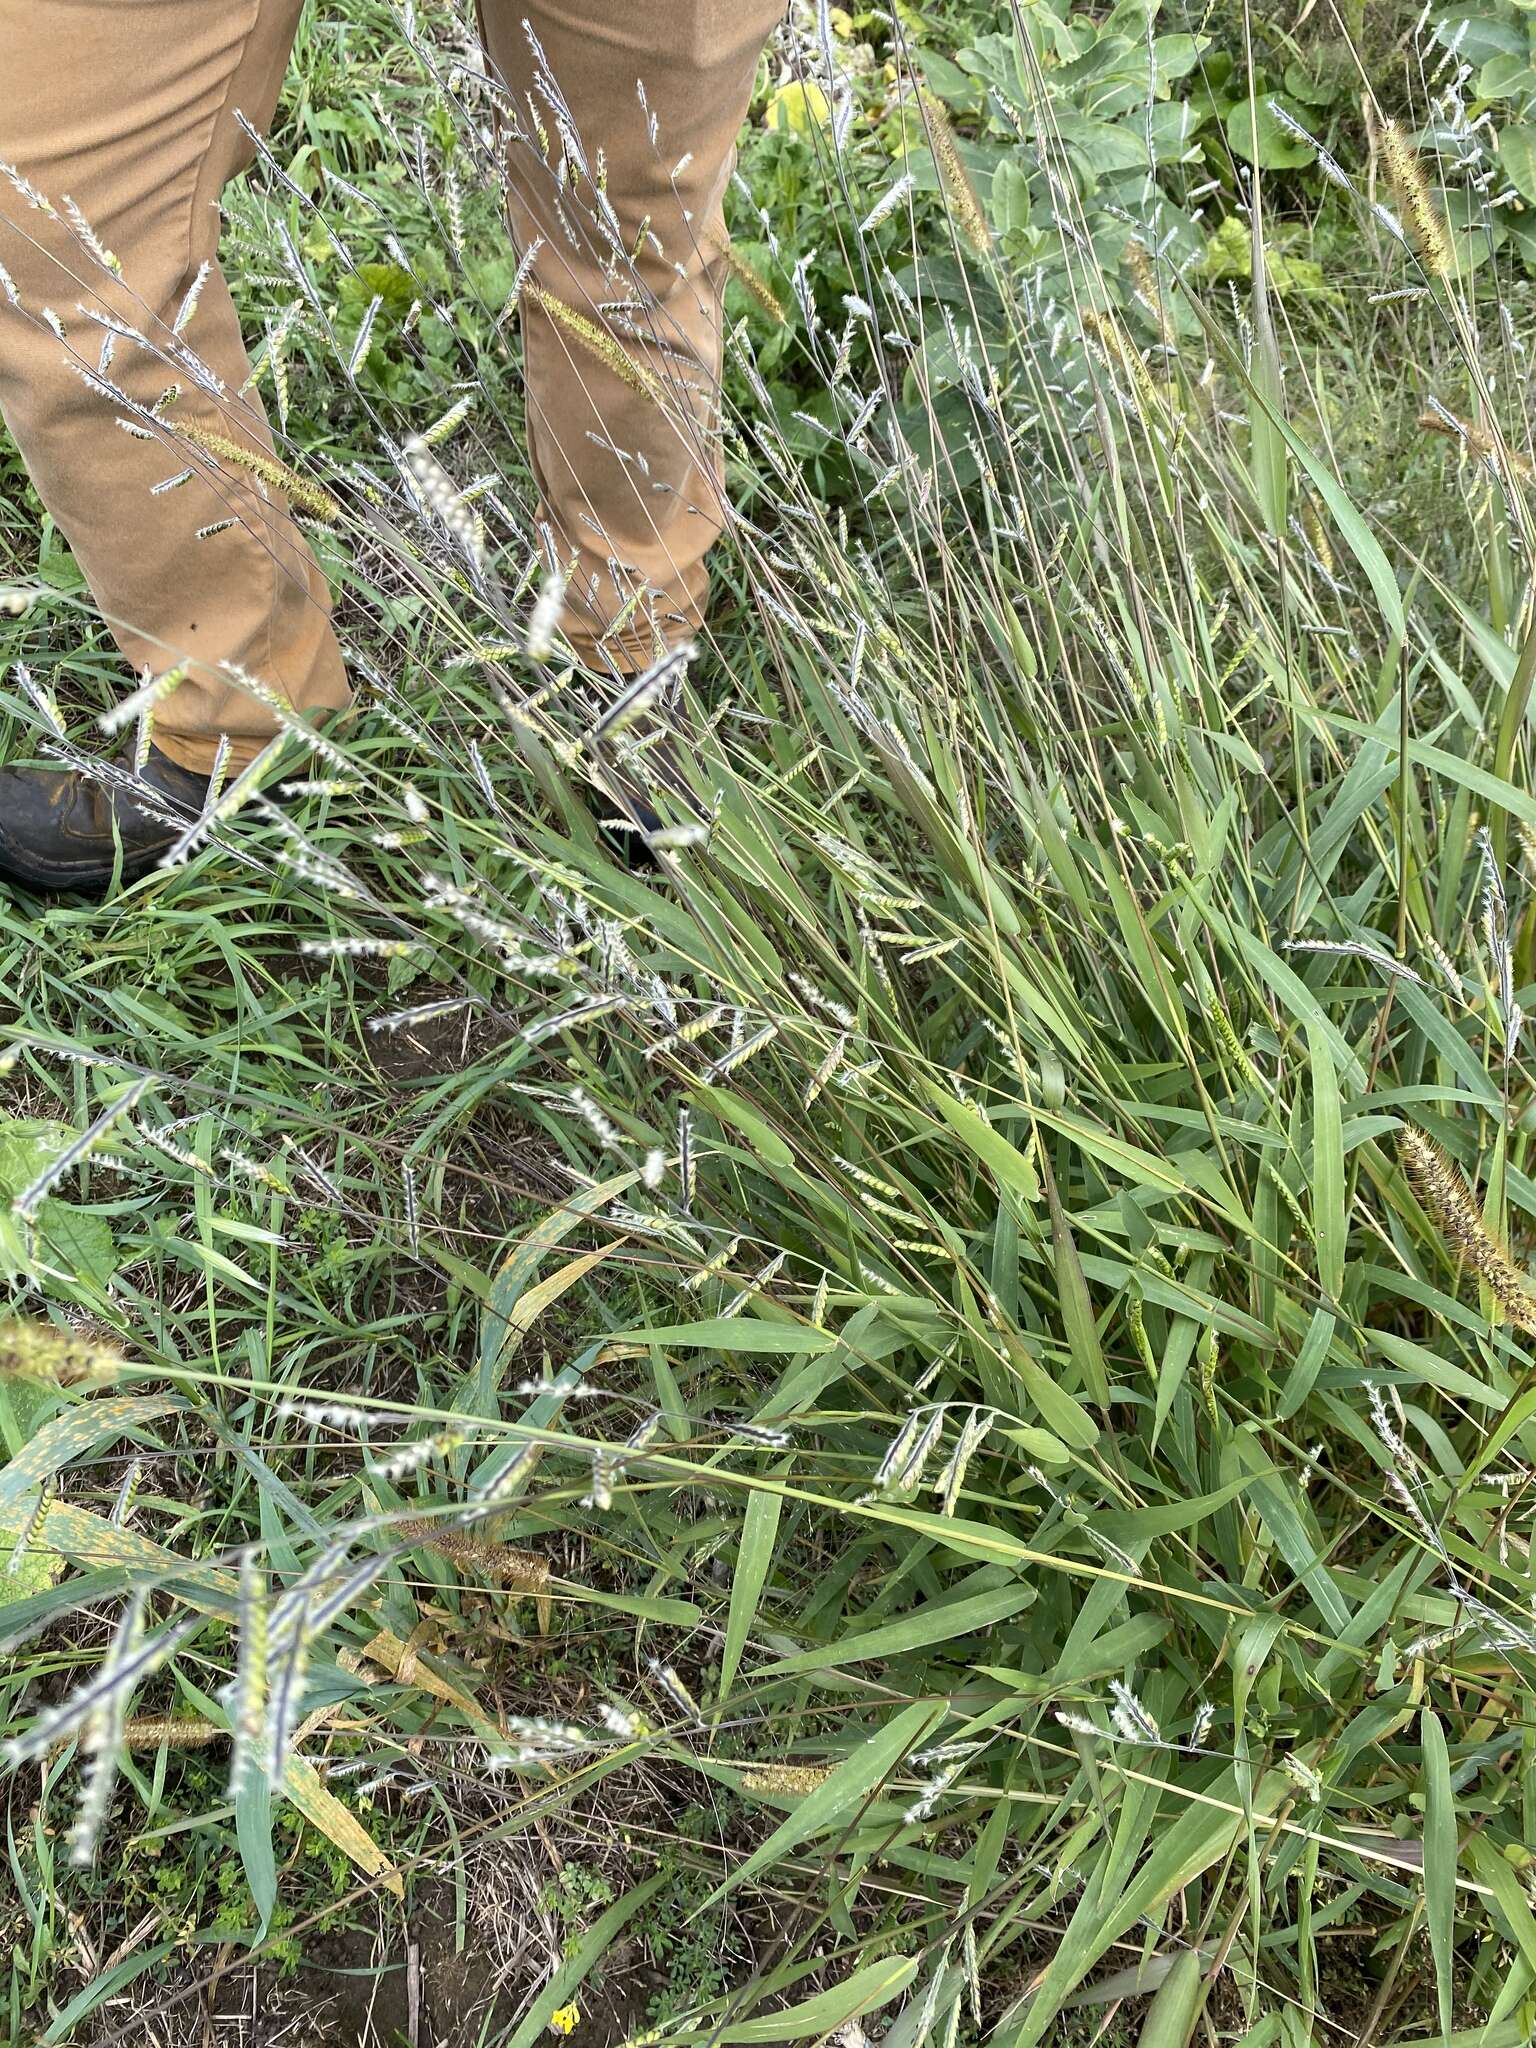 Image of hairy cupgrass